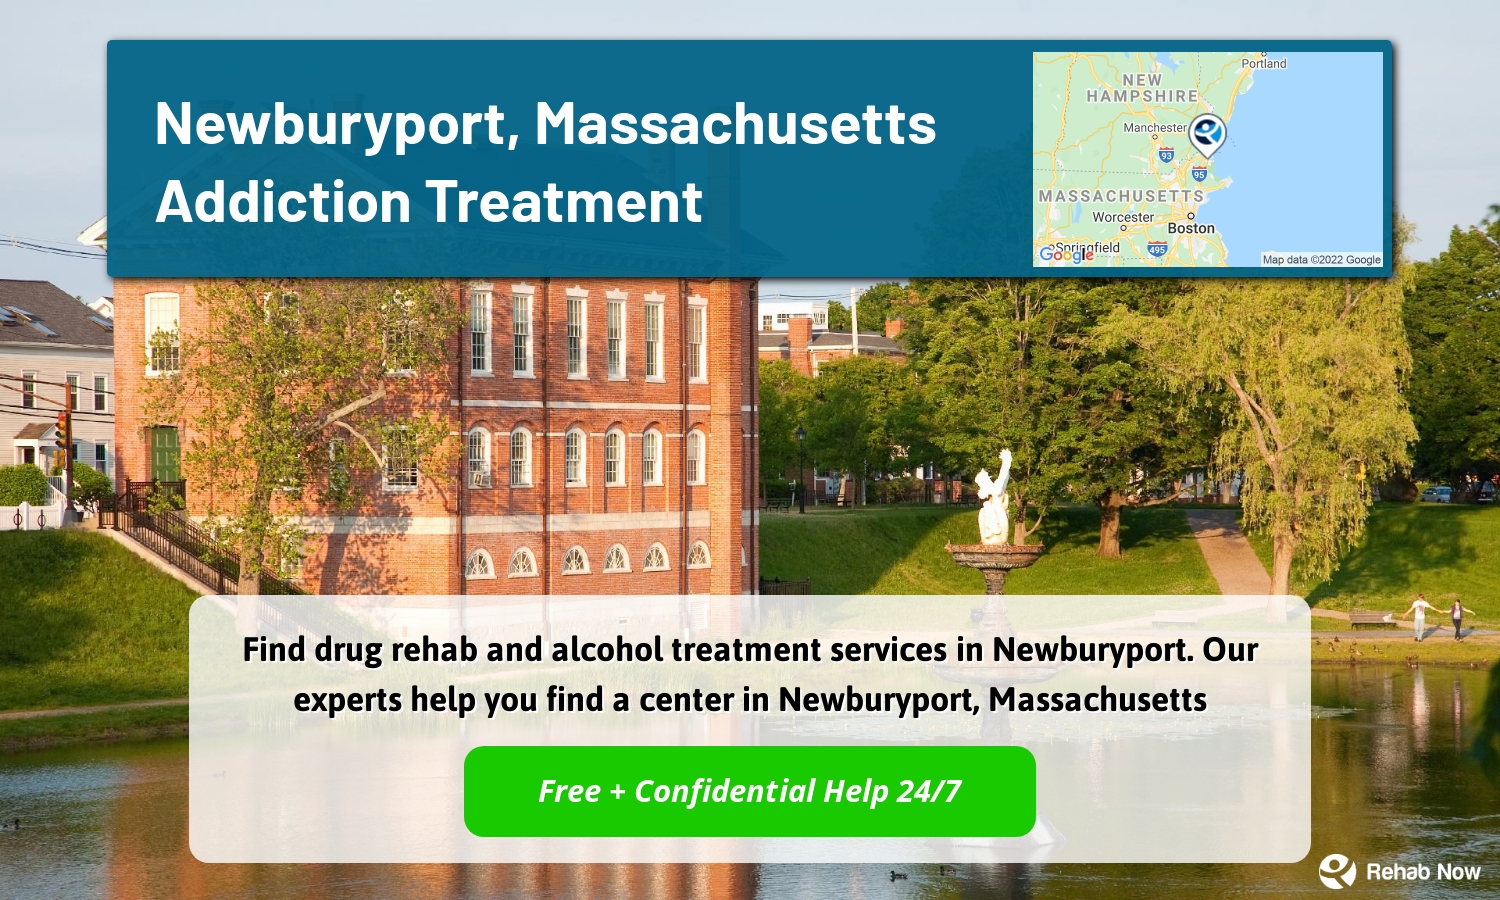 Find drug rehab and alcohol treatment services in Newburyport. Our experts help you find a center in Newburyport, Massachusetts